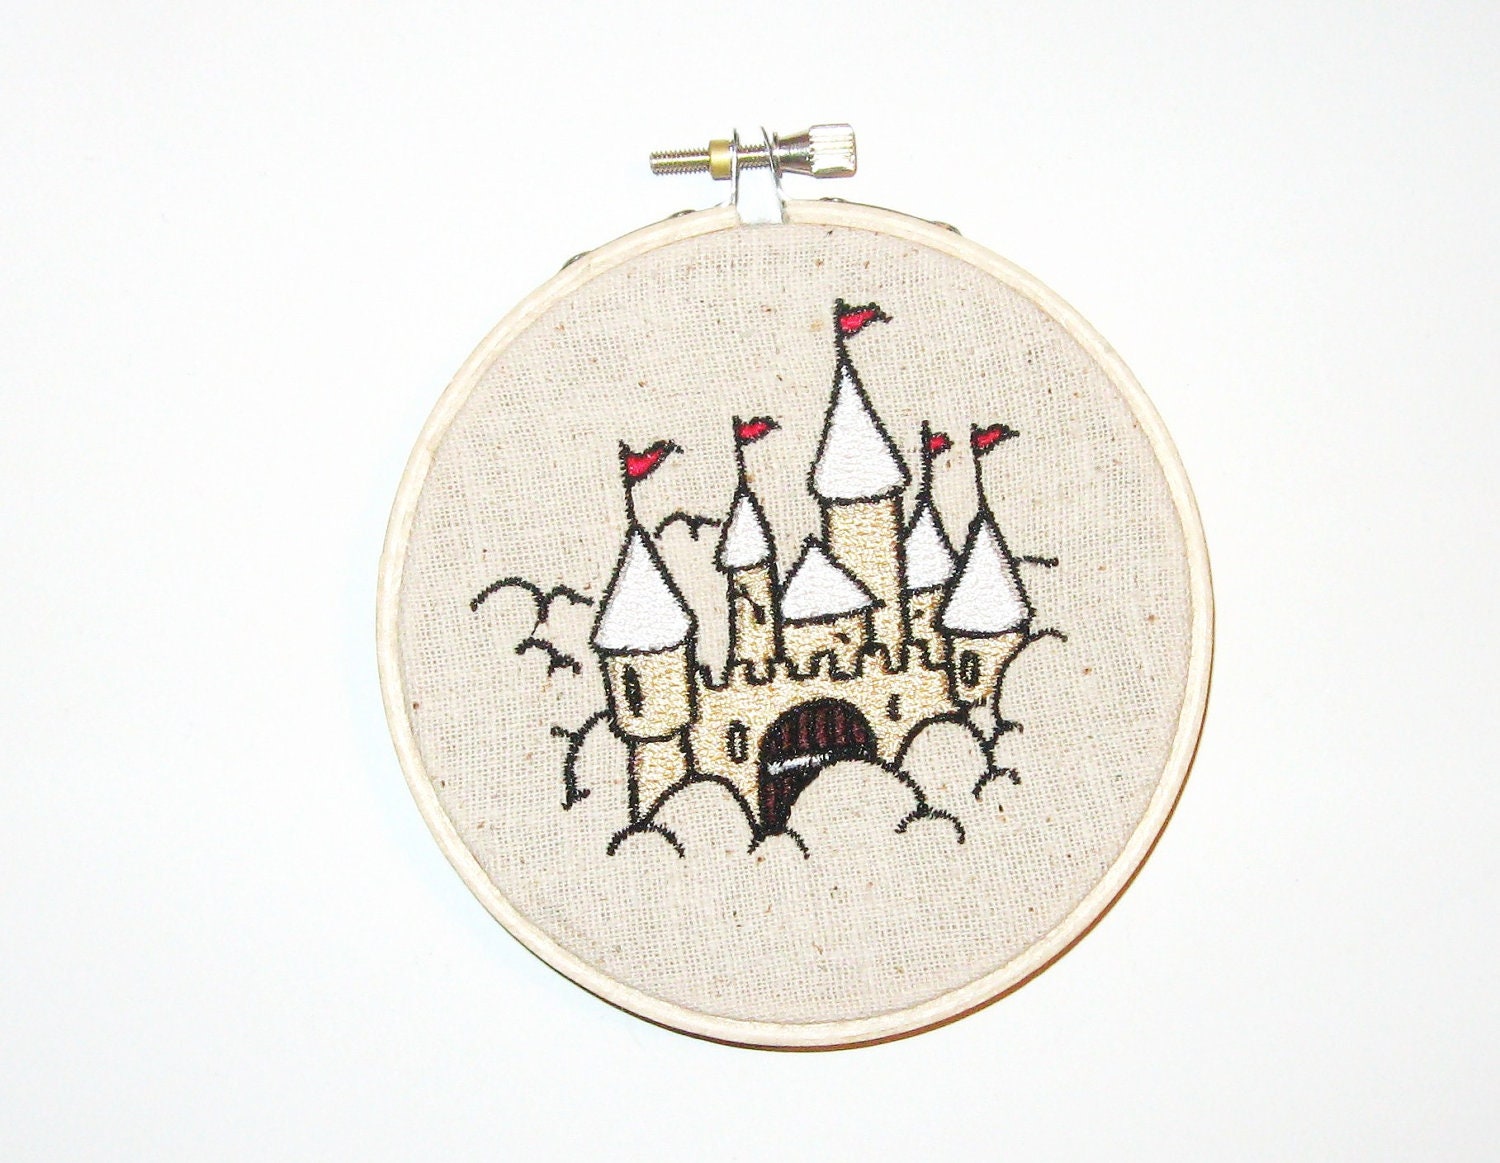 Embroidered Sandcastle Hoop Art - Comes As Shown on Sand Colored Fabric - 4 Inch Hoop - madebyjill